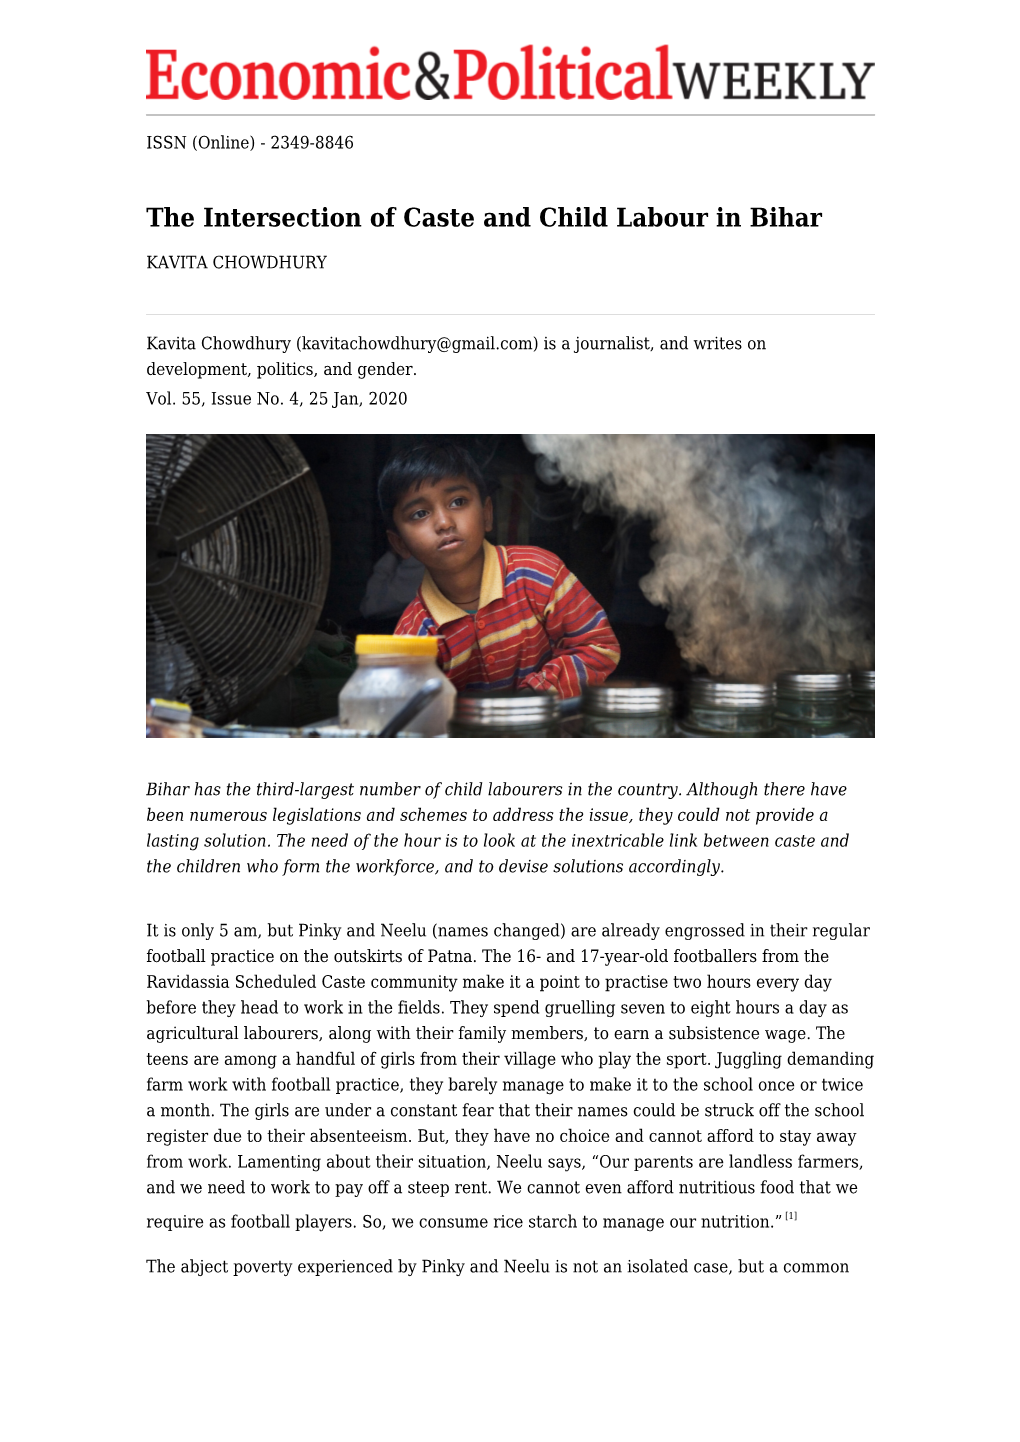 The Intersection of Caste and Child Labour in Bihar